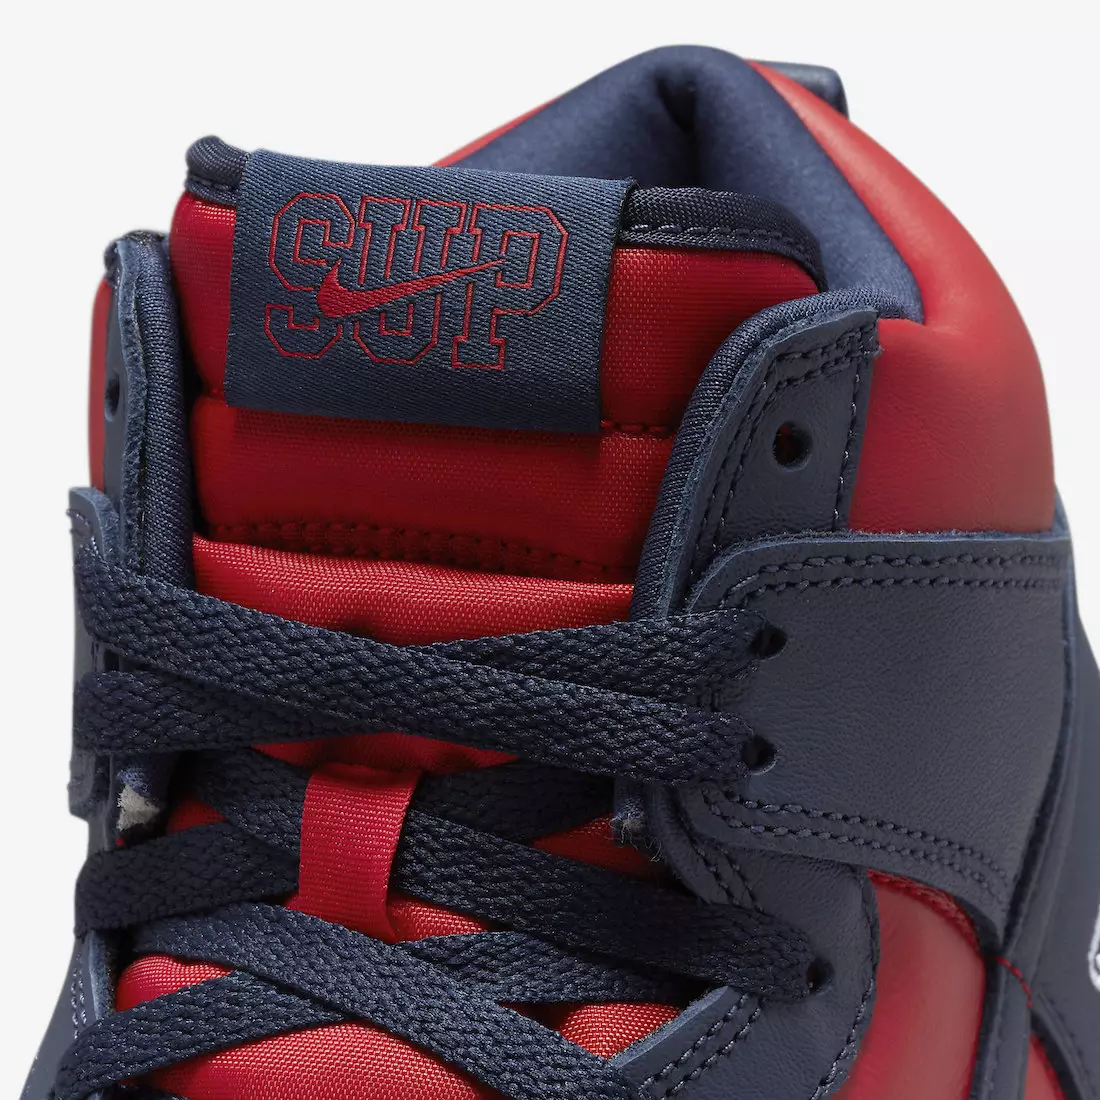 Supreme Nike SB Dunk High For any Means Navy Red N3741-600 Utgivelsesdato